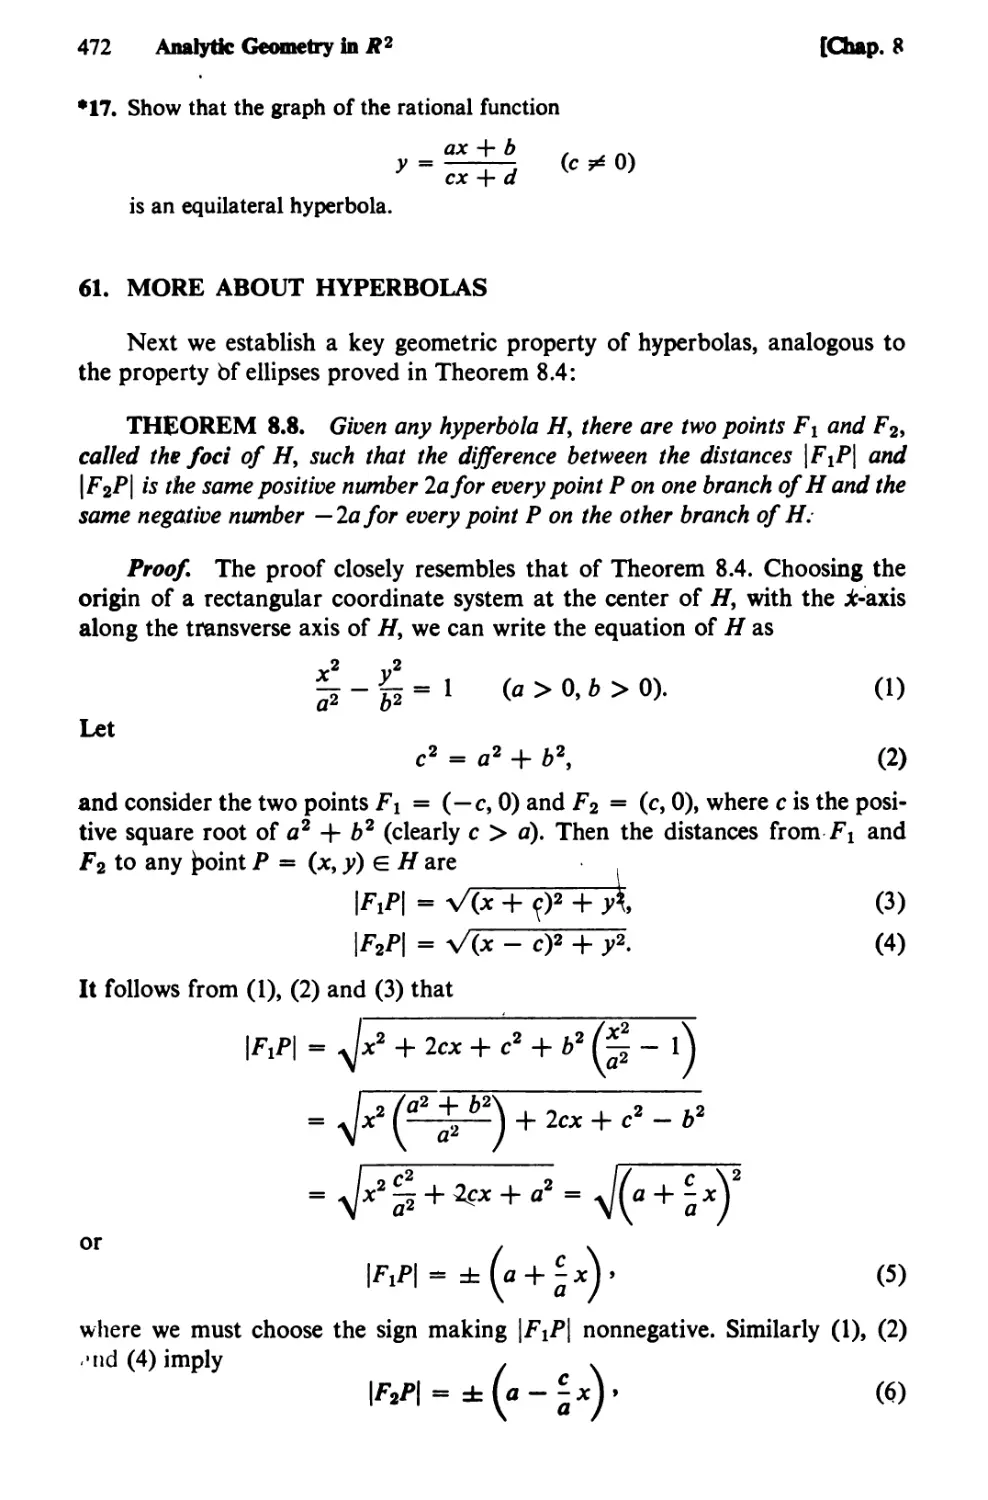 61. More About Hyperbolas